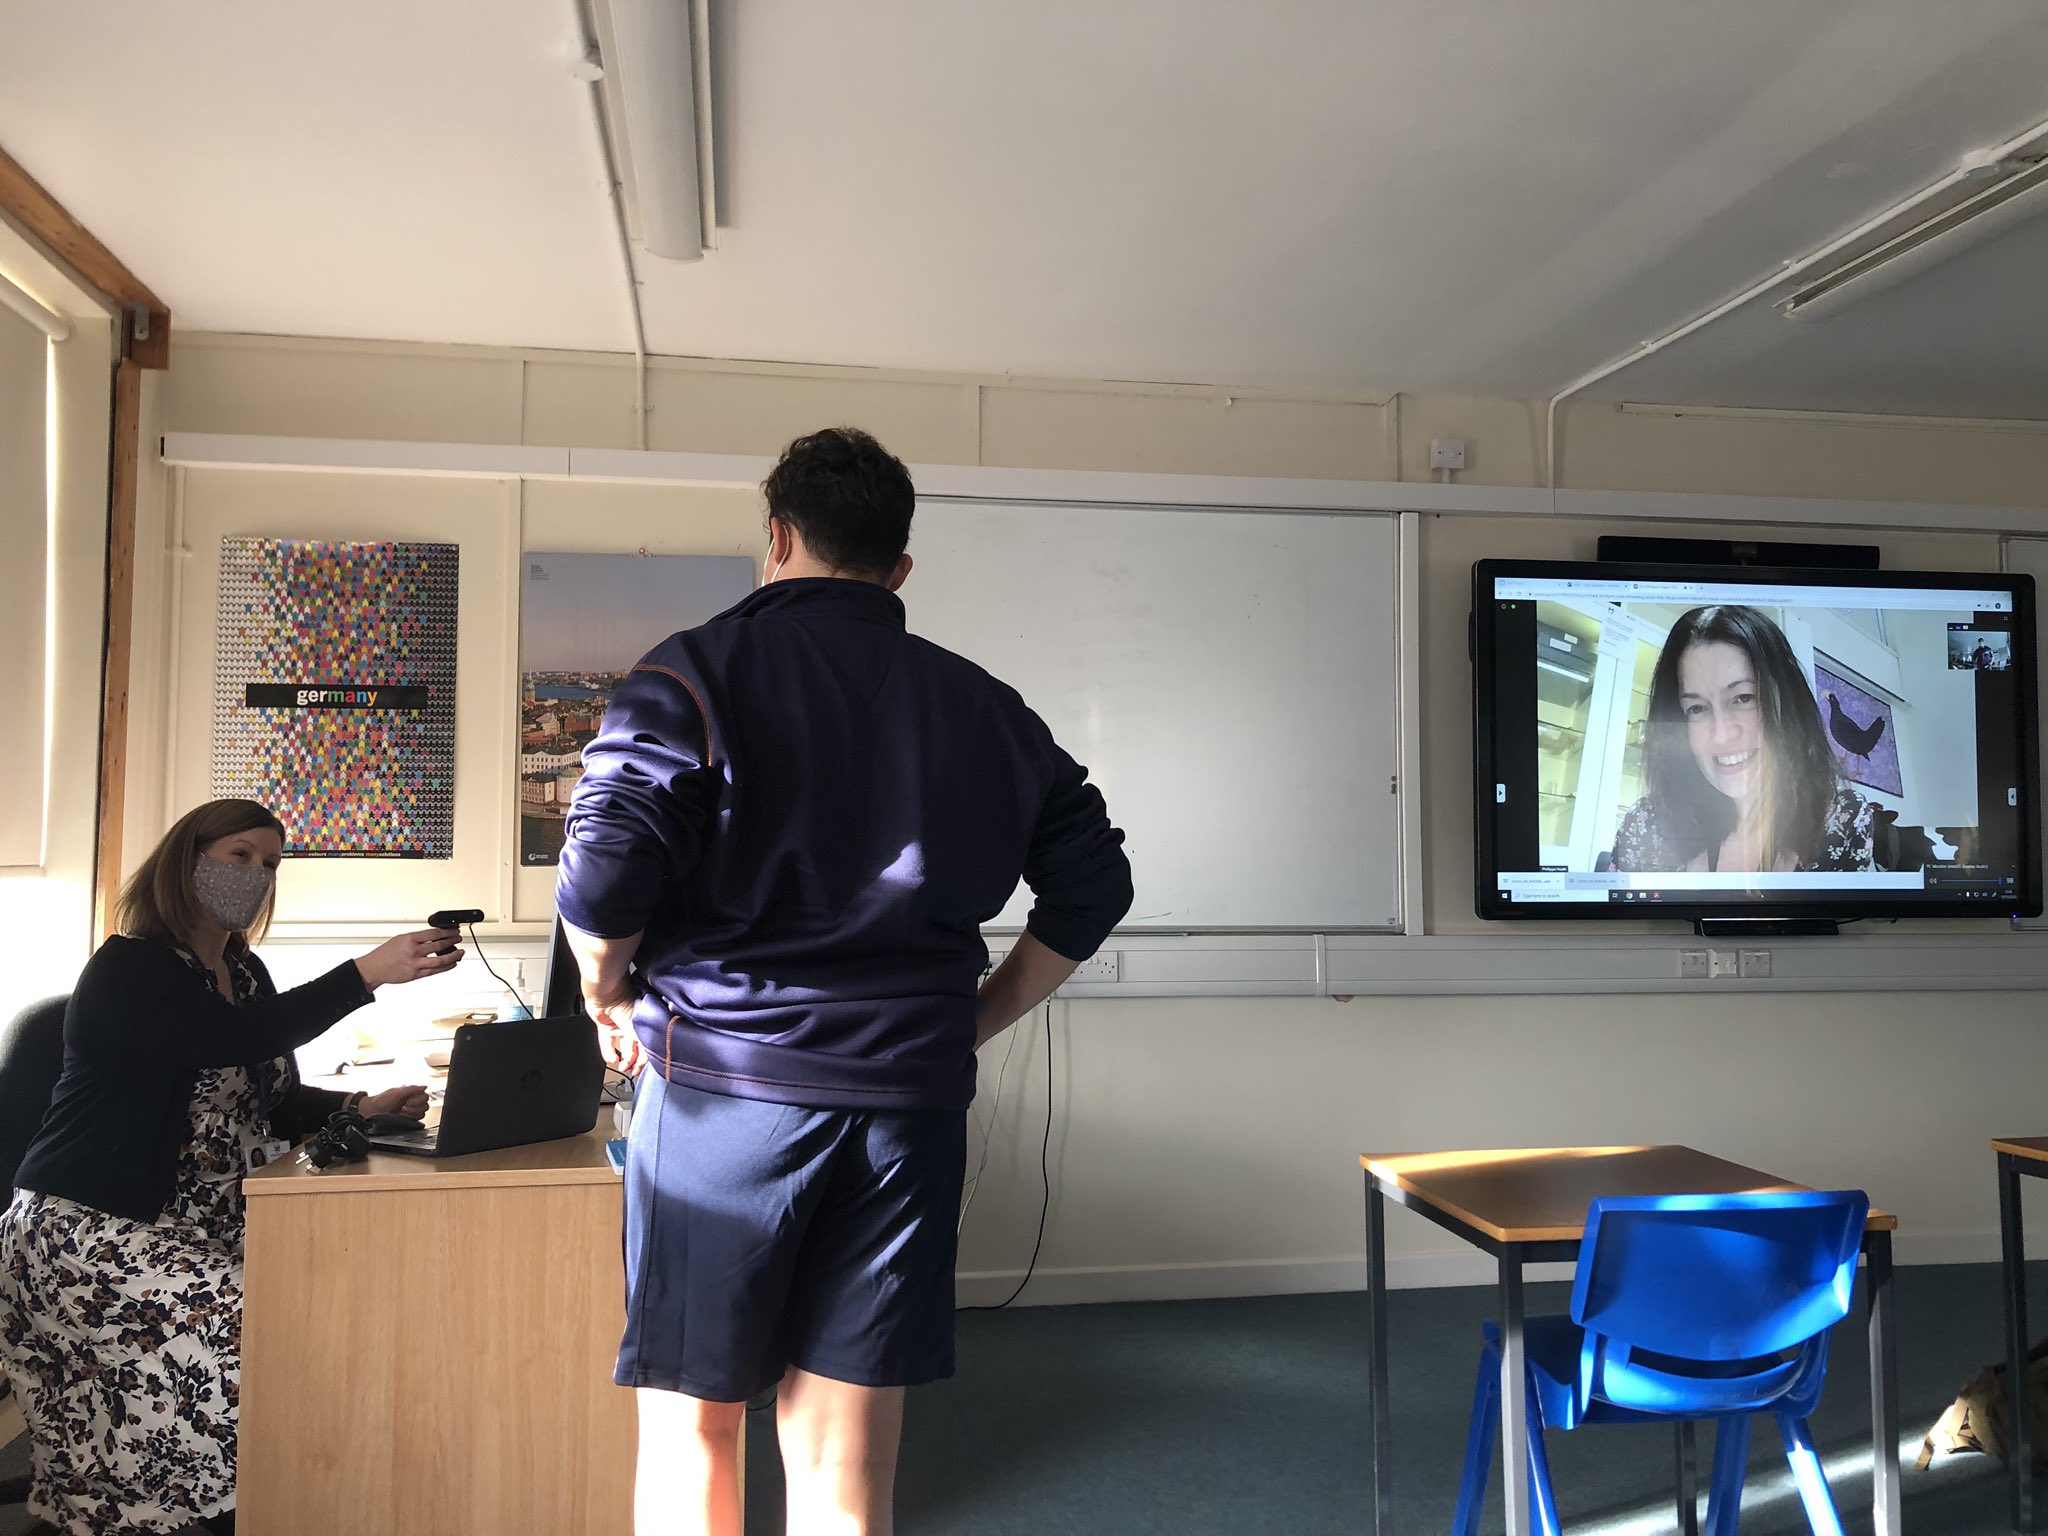 Student in blue jumper and shorts stood at a desk talking to a female teacher wearing a floral skirt